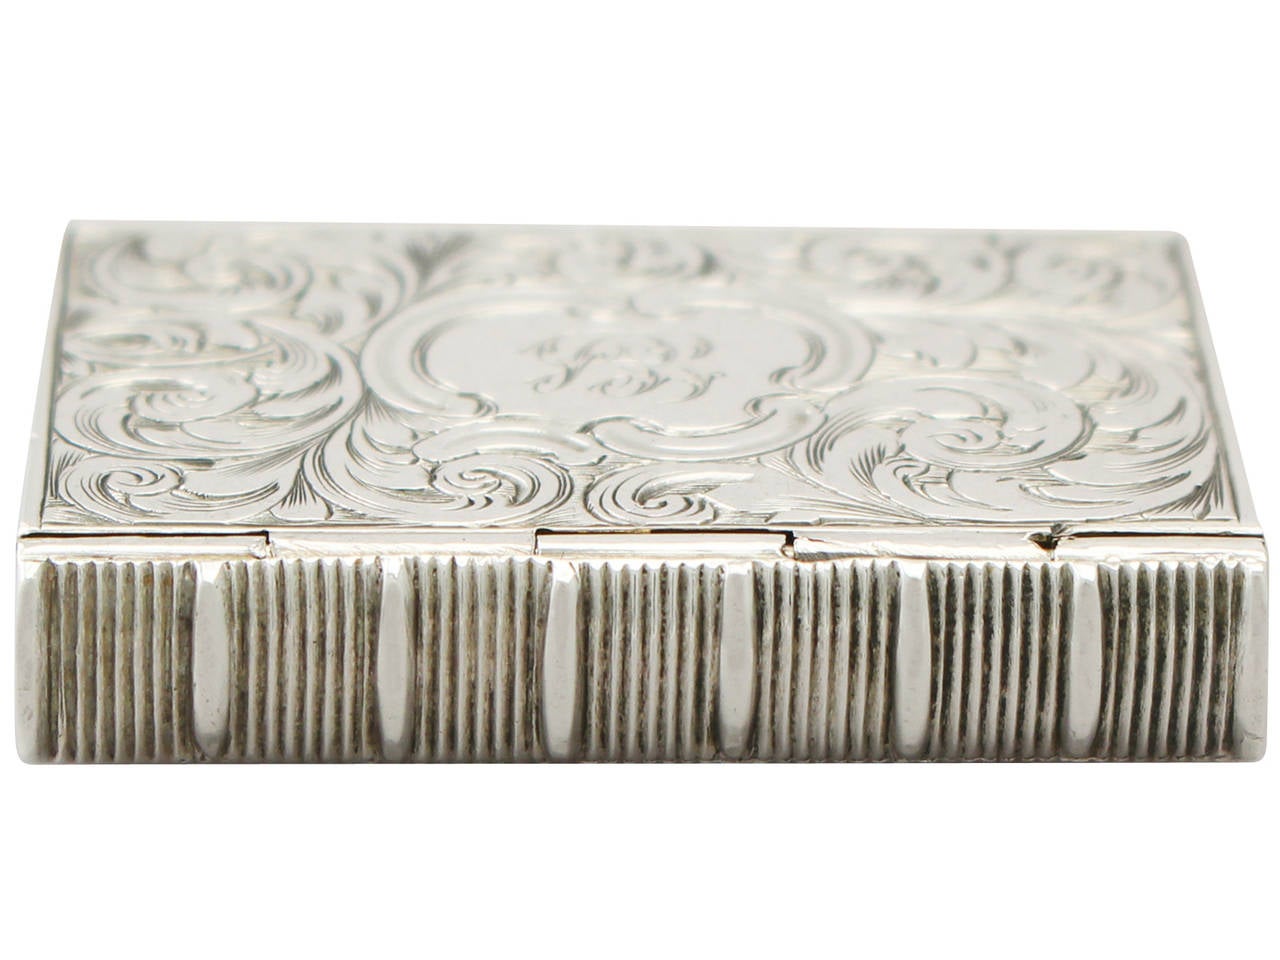 A fine and impressive antique Victorian English sterling silver vinaigrette in the form of a book; an addition to our silver boxes collection

This fine antique Victorian sterling silver vinaigrette has a rectangular form modelled in the form of a